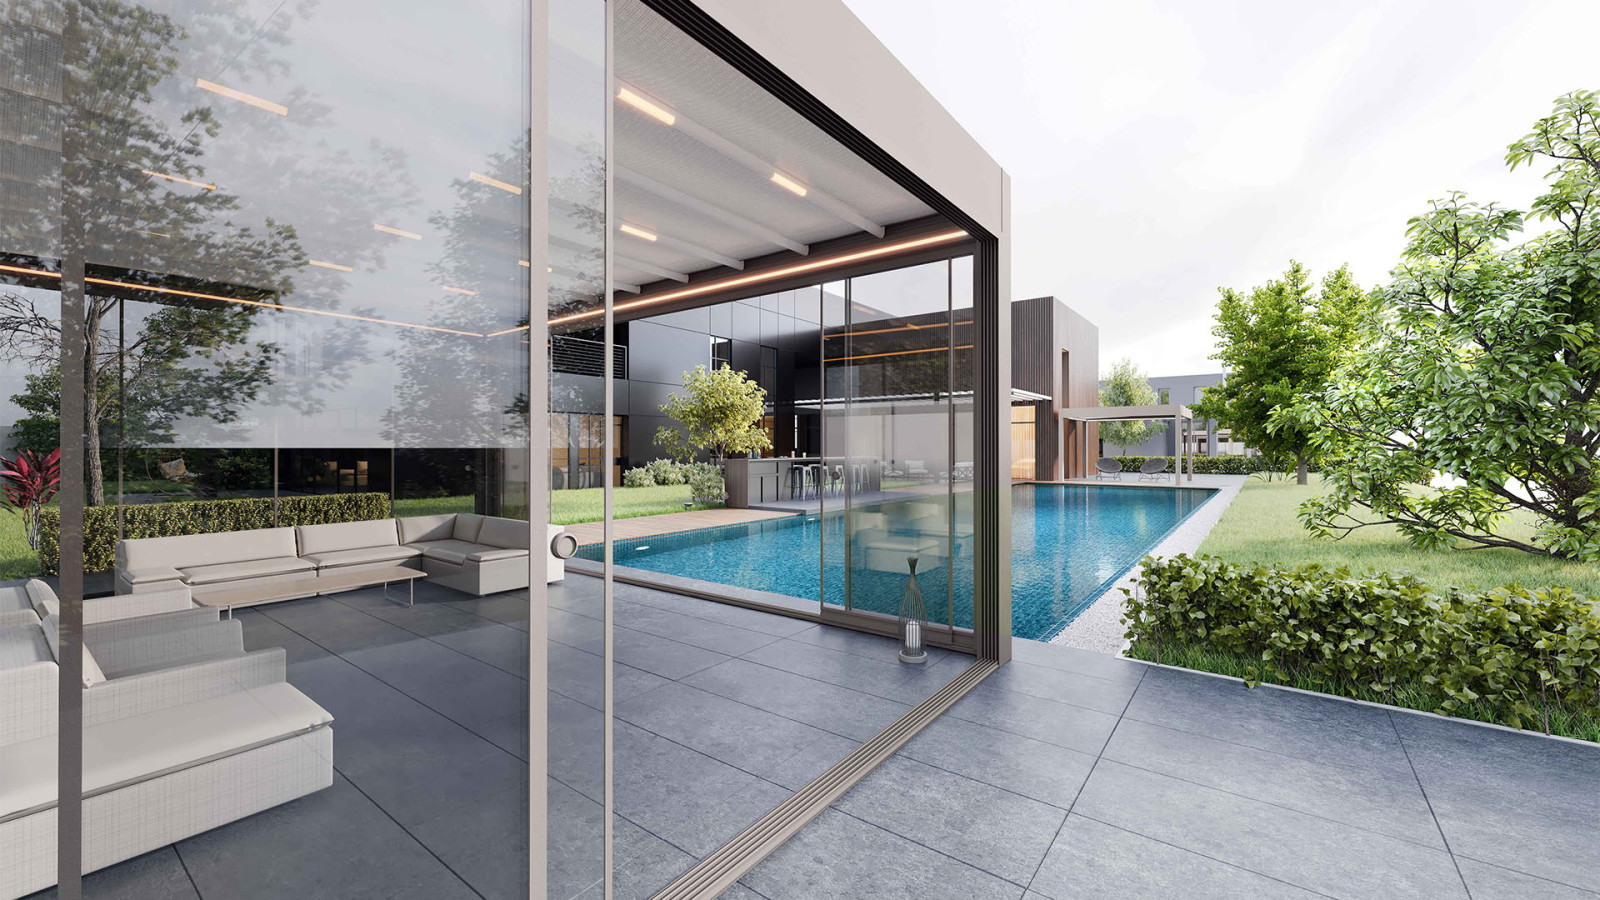 Modern house with Sliding Glass Systems featuring a glass enclosed pool area and patio with glass wall.